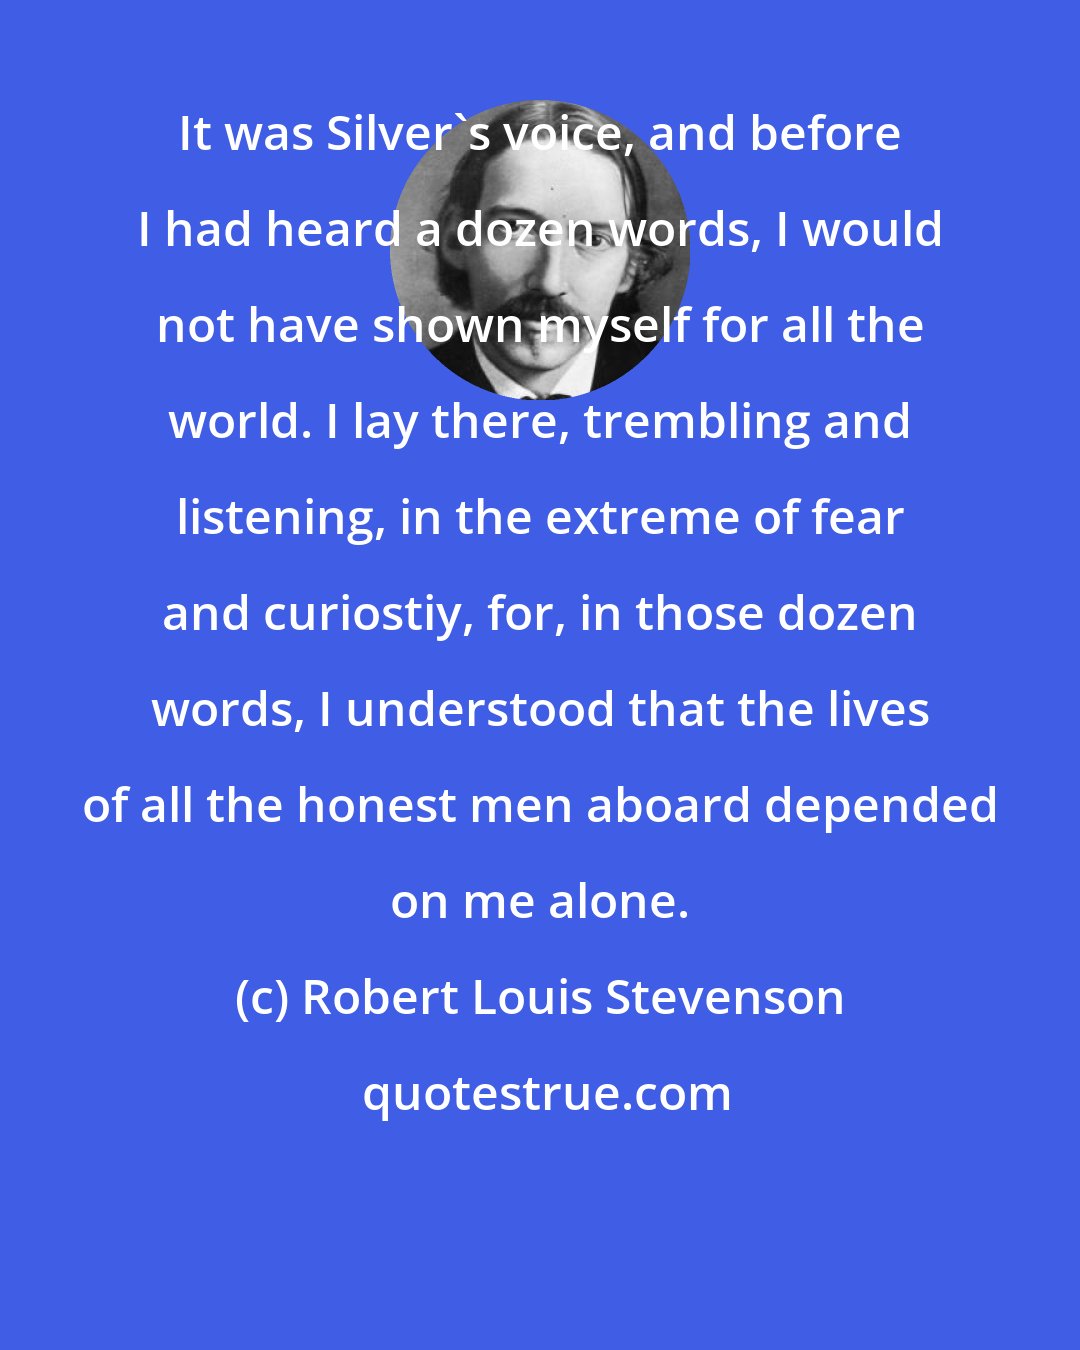 Robert Louis Stevenson: It was Silver's voice, and before I had heard a dozen words, I would not have shown myself for all the world. I lay there, trembling and listening, in the extreme of fear and curiostiy, for, in those dozen words, I understood that the lives of all the honest men aboard depended on me alone.